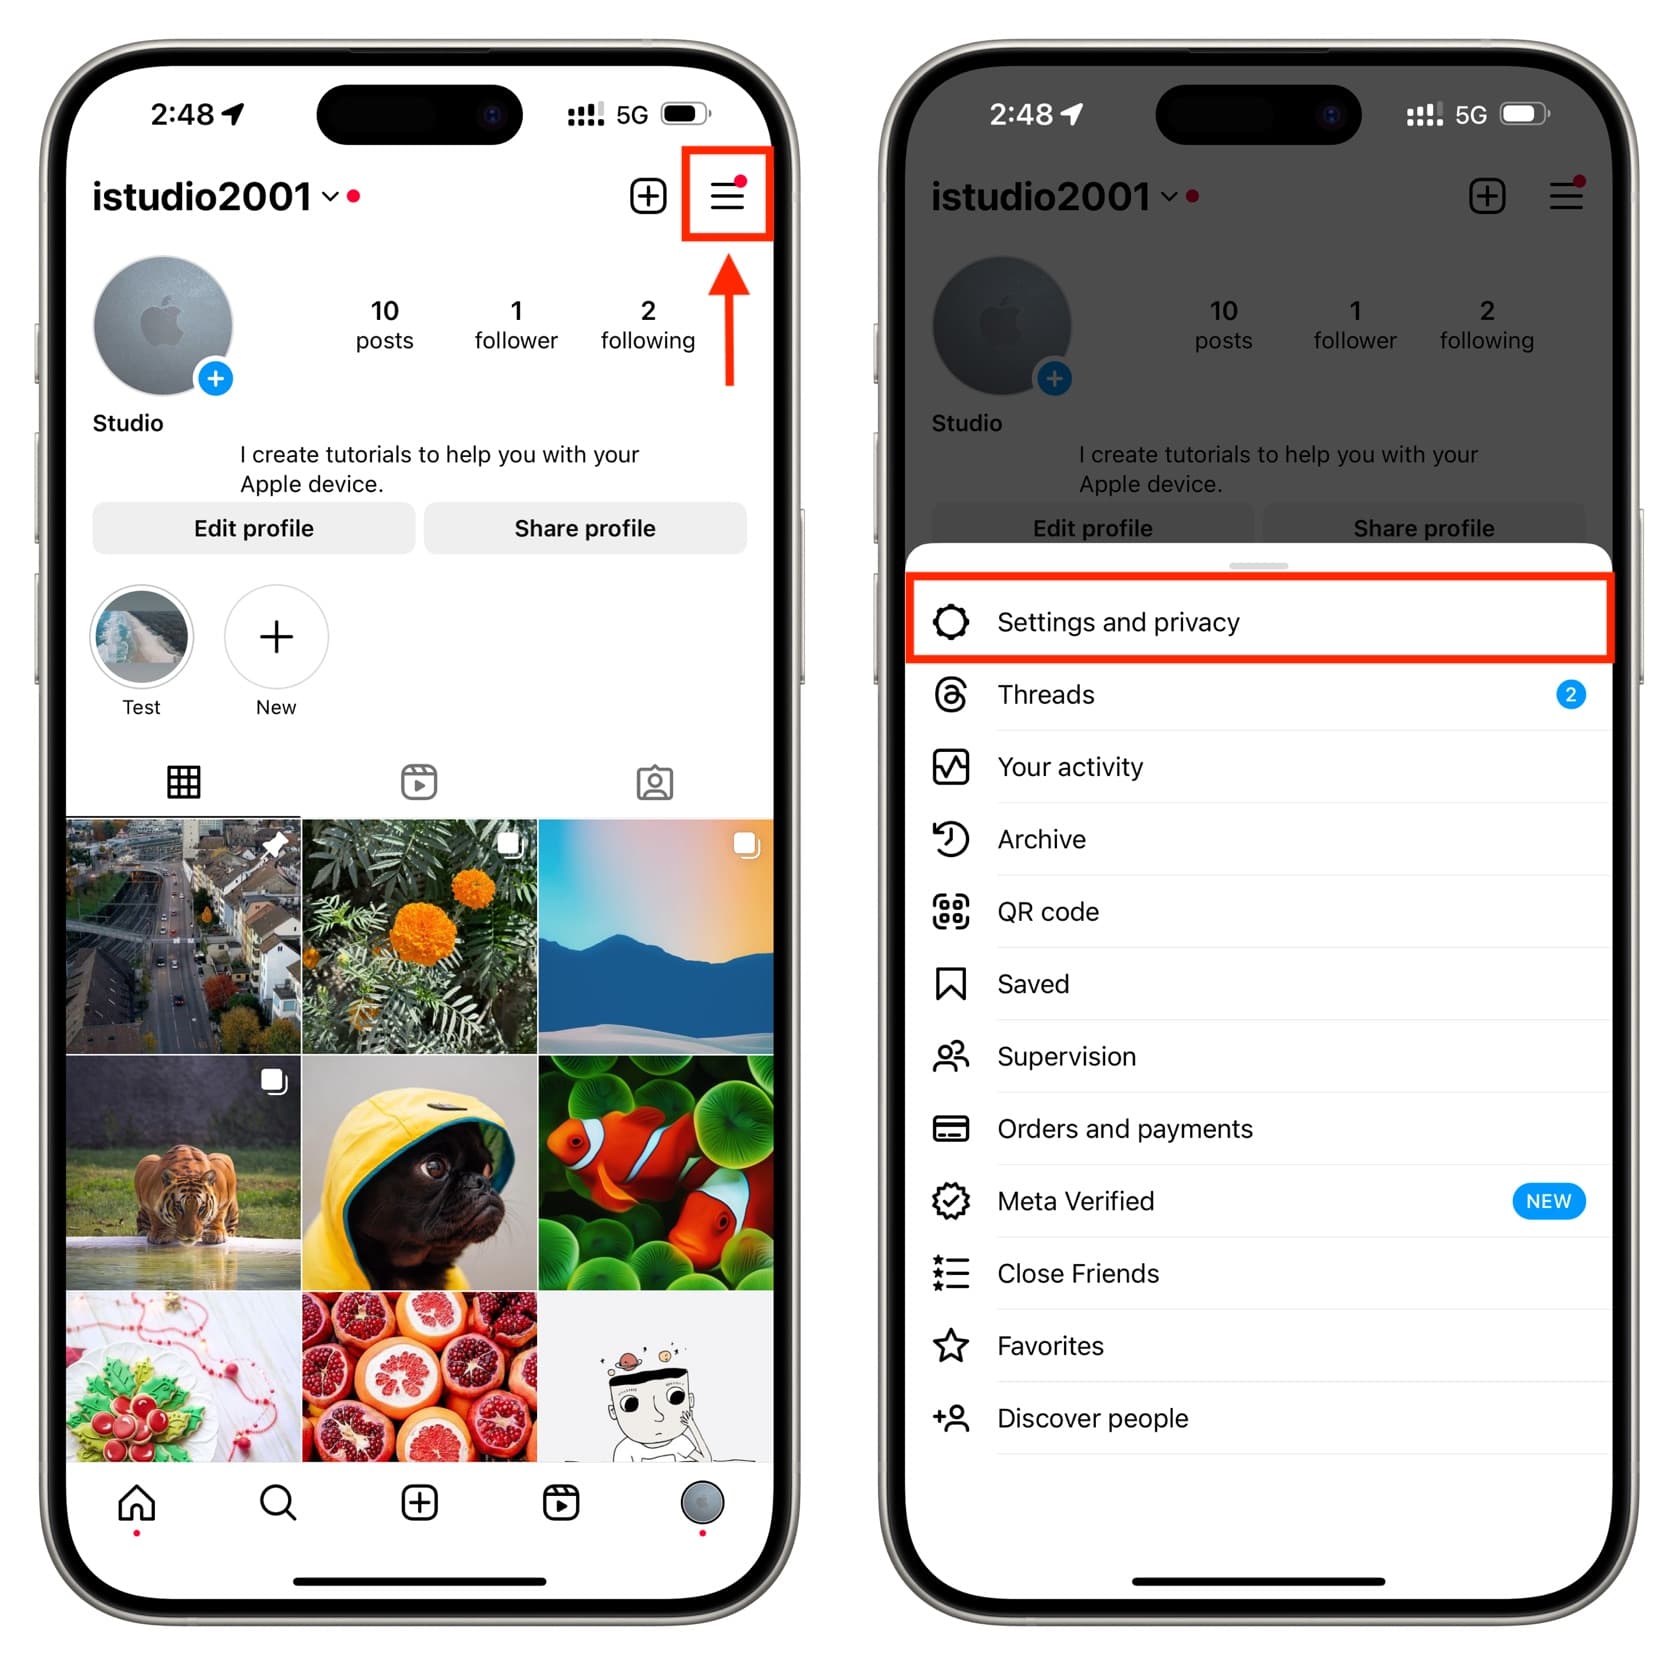 Tap menu icon on Instagram profile and then tap Settings and privacy